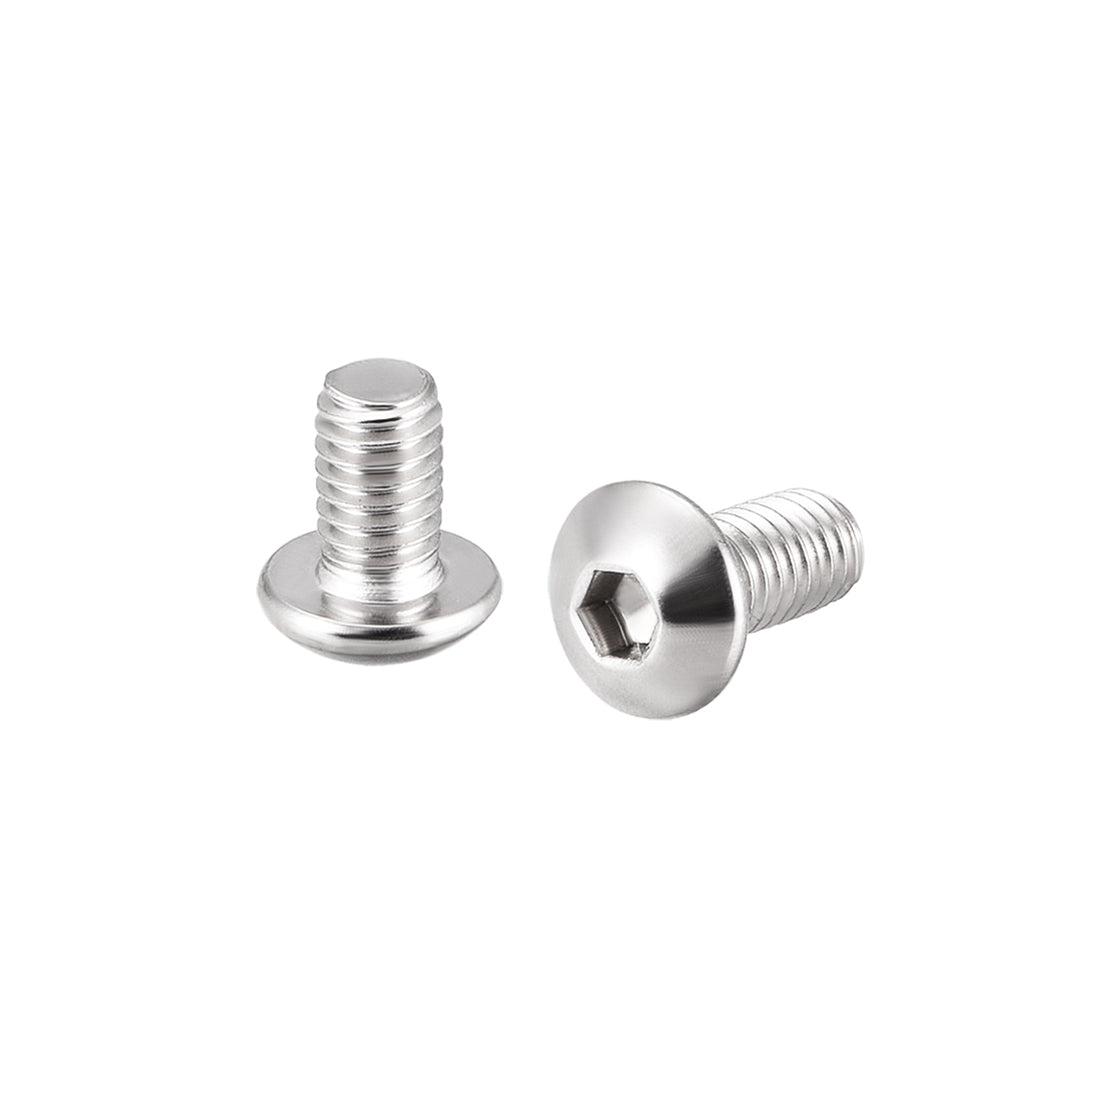 uxcell Uxcell M4x6mm Machine Screws Hex Socket Round Head Screw 304 Stainless Steel Fasteners Bolts 20pcs